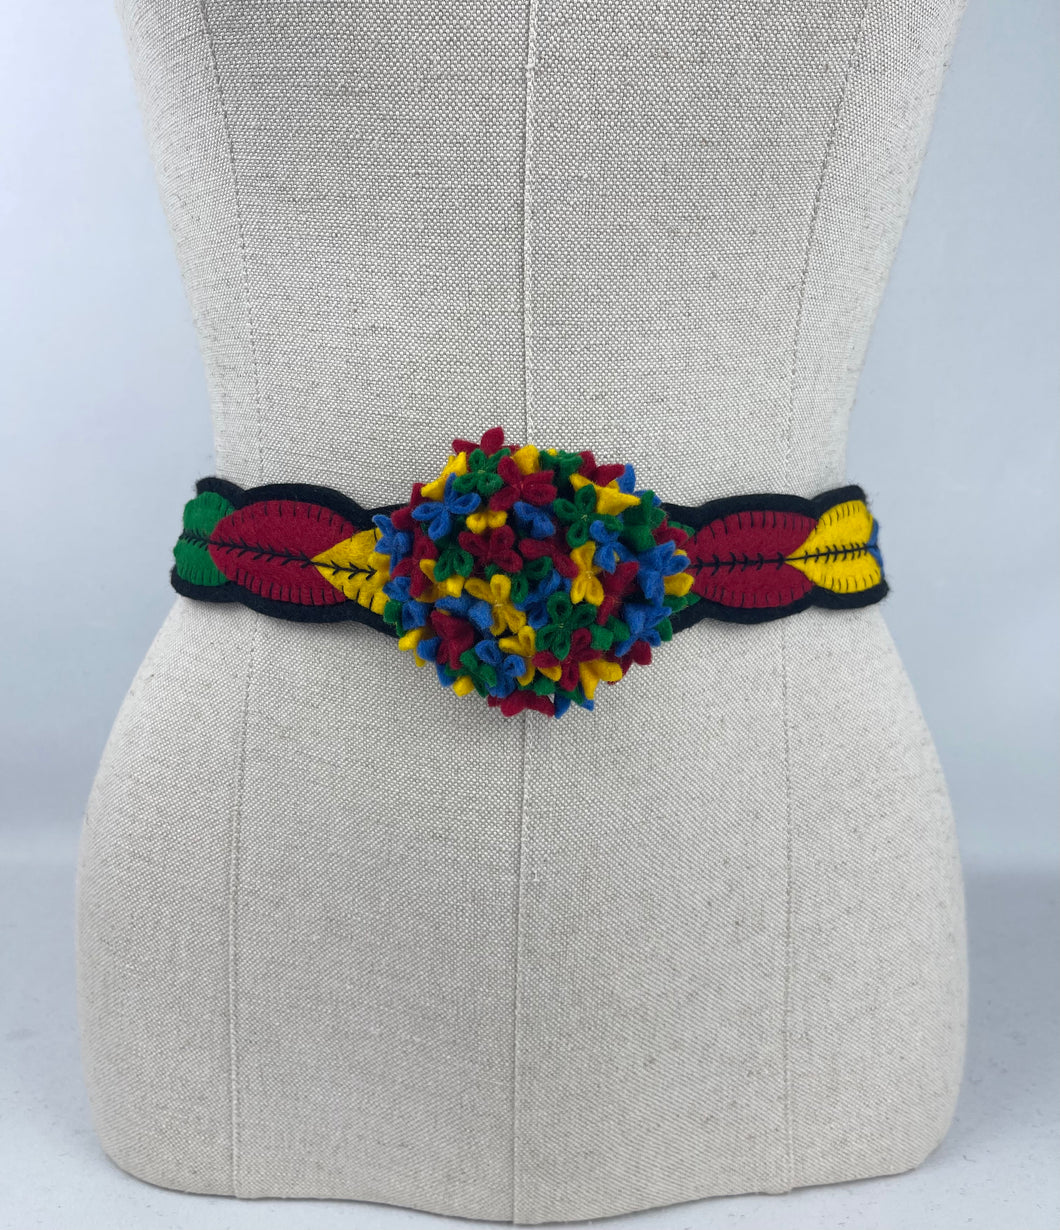 1940's Style Colourful Felt Belt in Red, Green, Yellow and Blue Made From a 1941 Pattern Using Pure Wool Felt - Waist 29